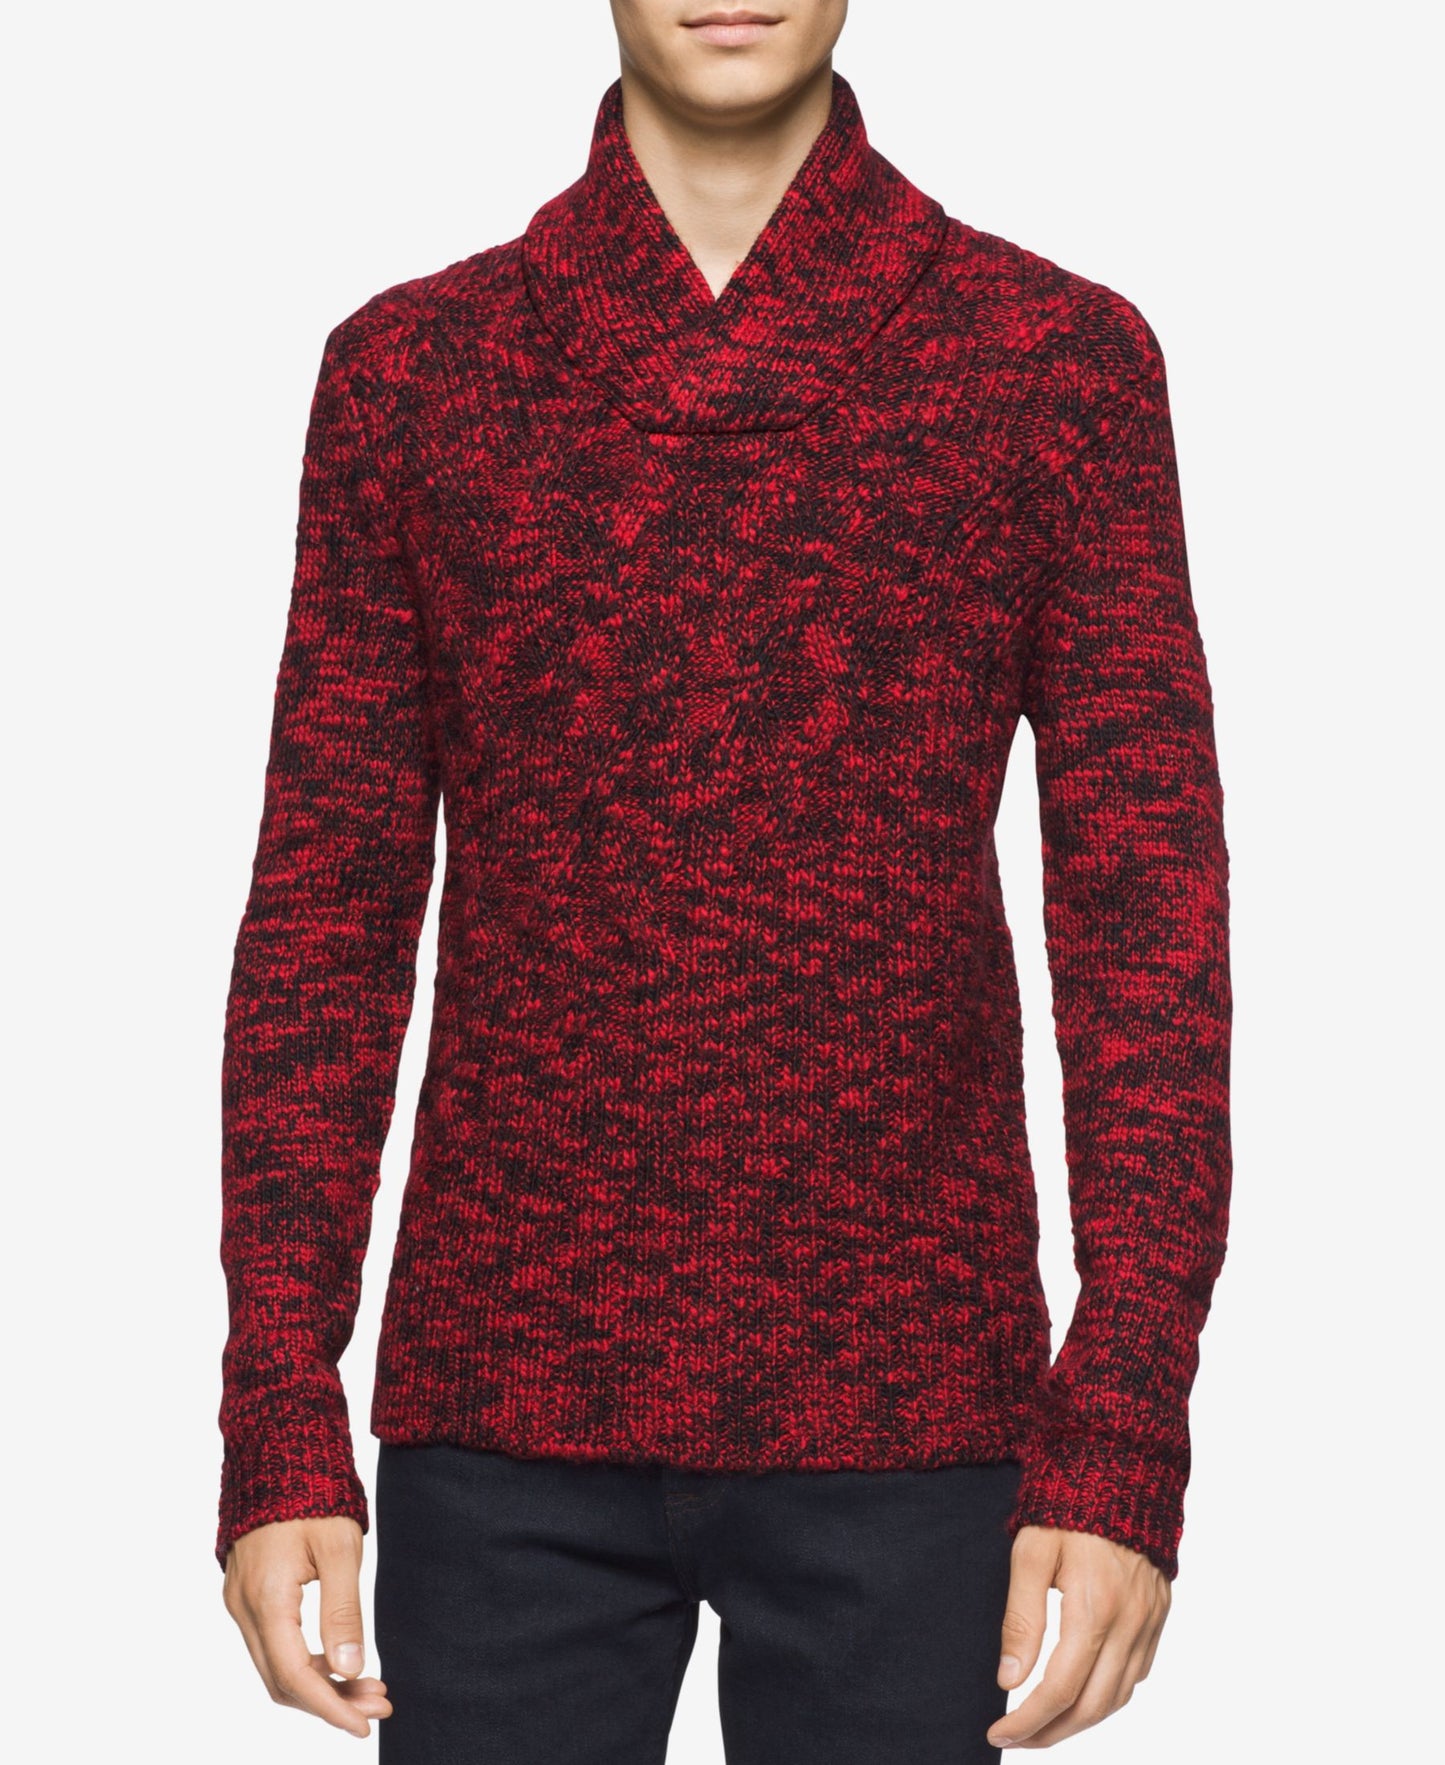 Calvin Klein Asymmetric Cable-Knit Shawl-Collar Sweater XXLarge Black/Red Combo